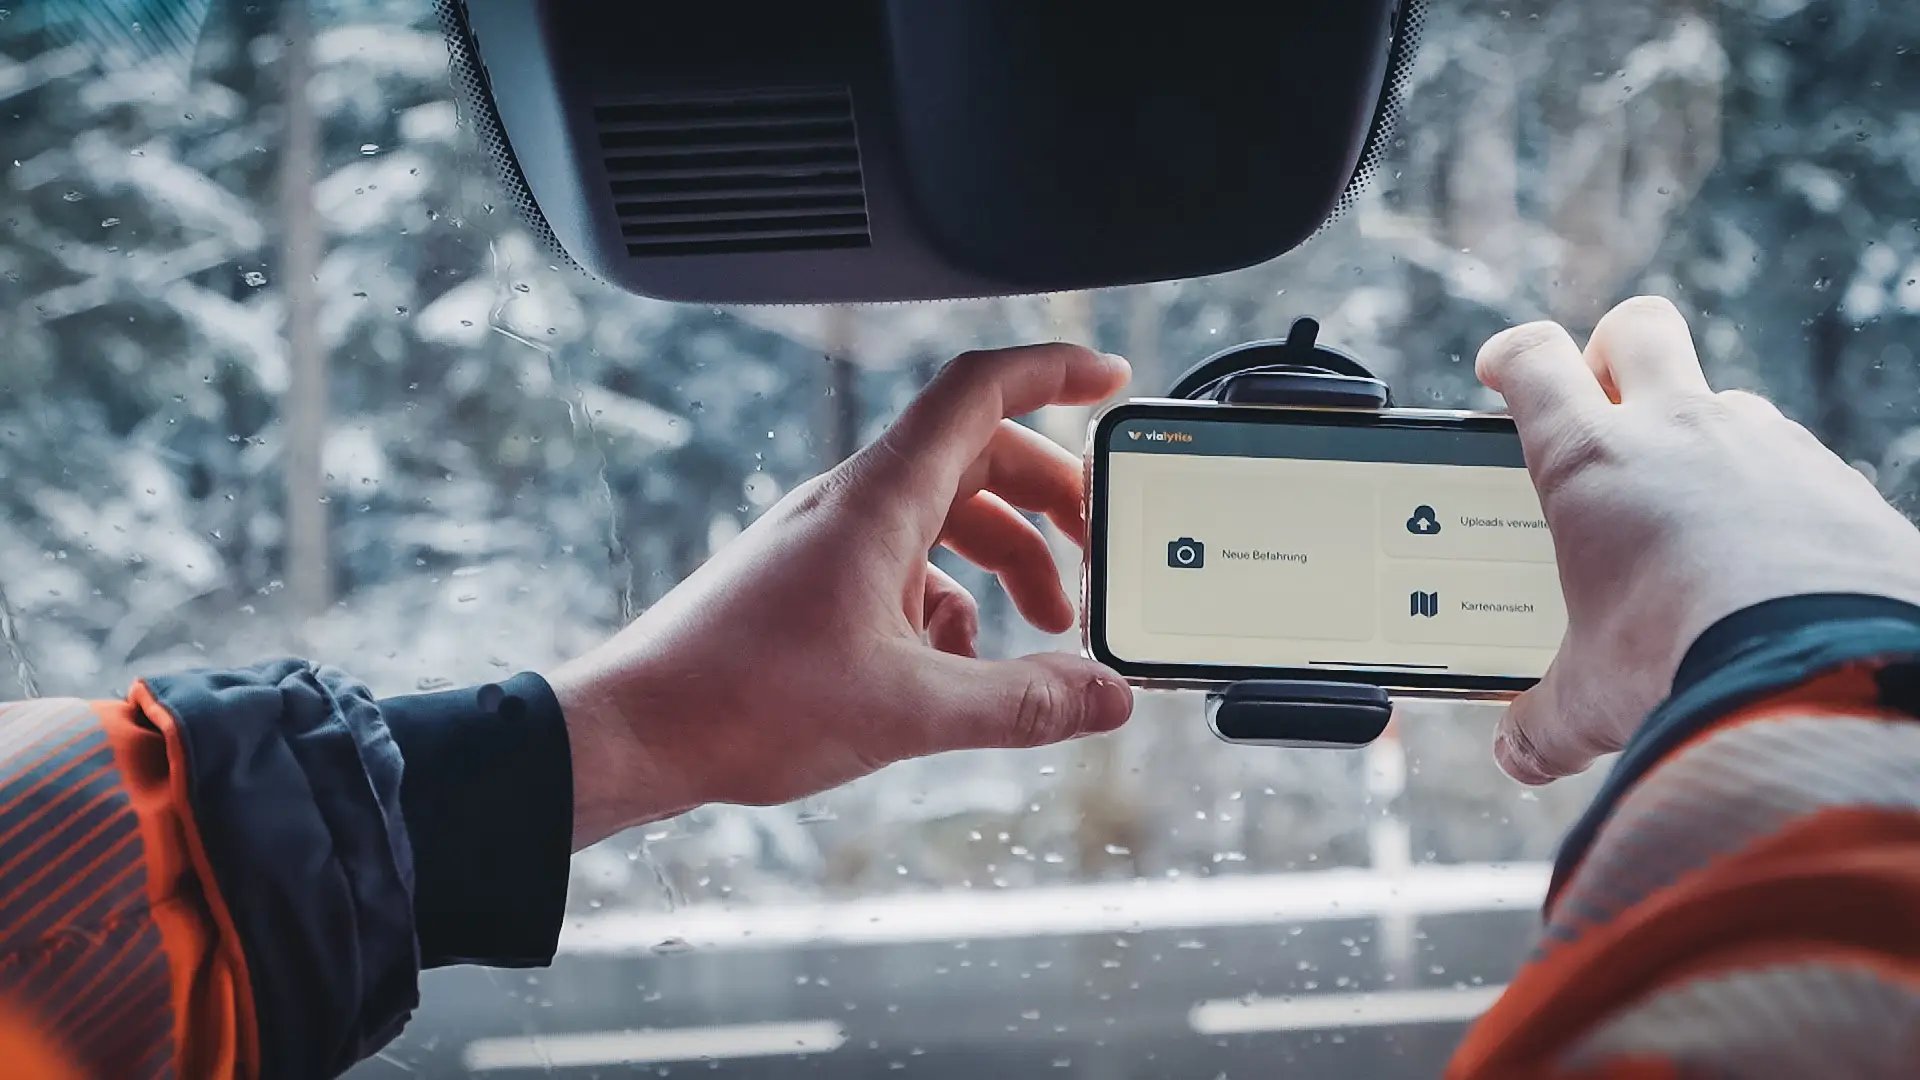 vialytics phone in the windshield on a snowy road being handled by a building yard worker